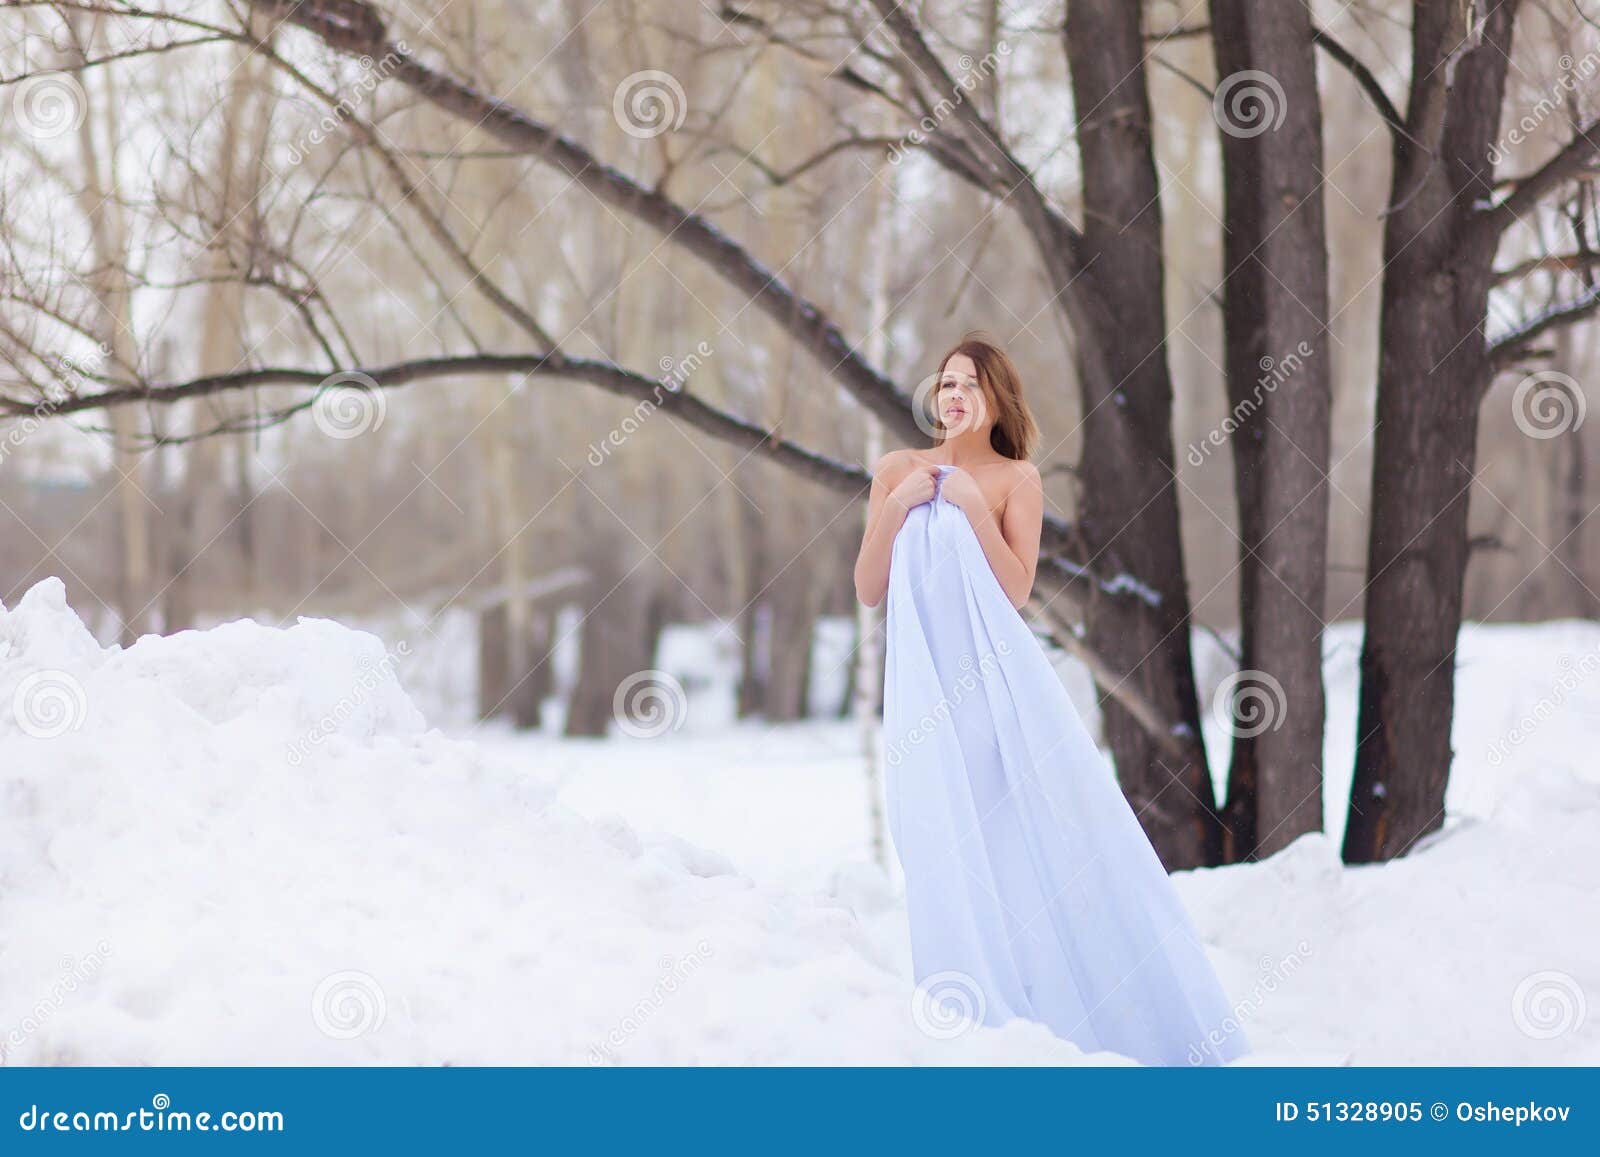 Naked Girl In Winter Forest Stock Image Image Of Cheerful Adult